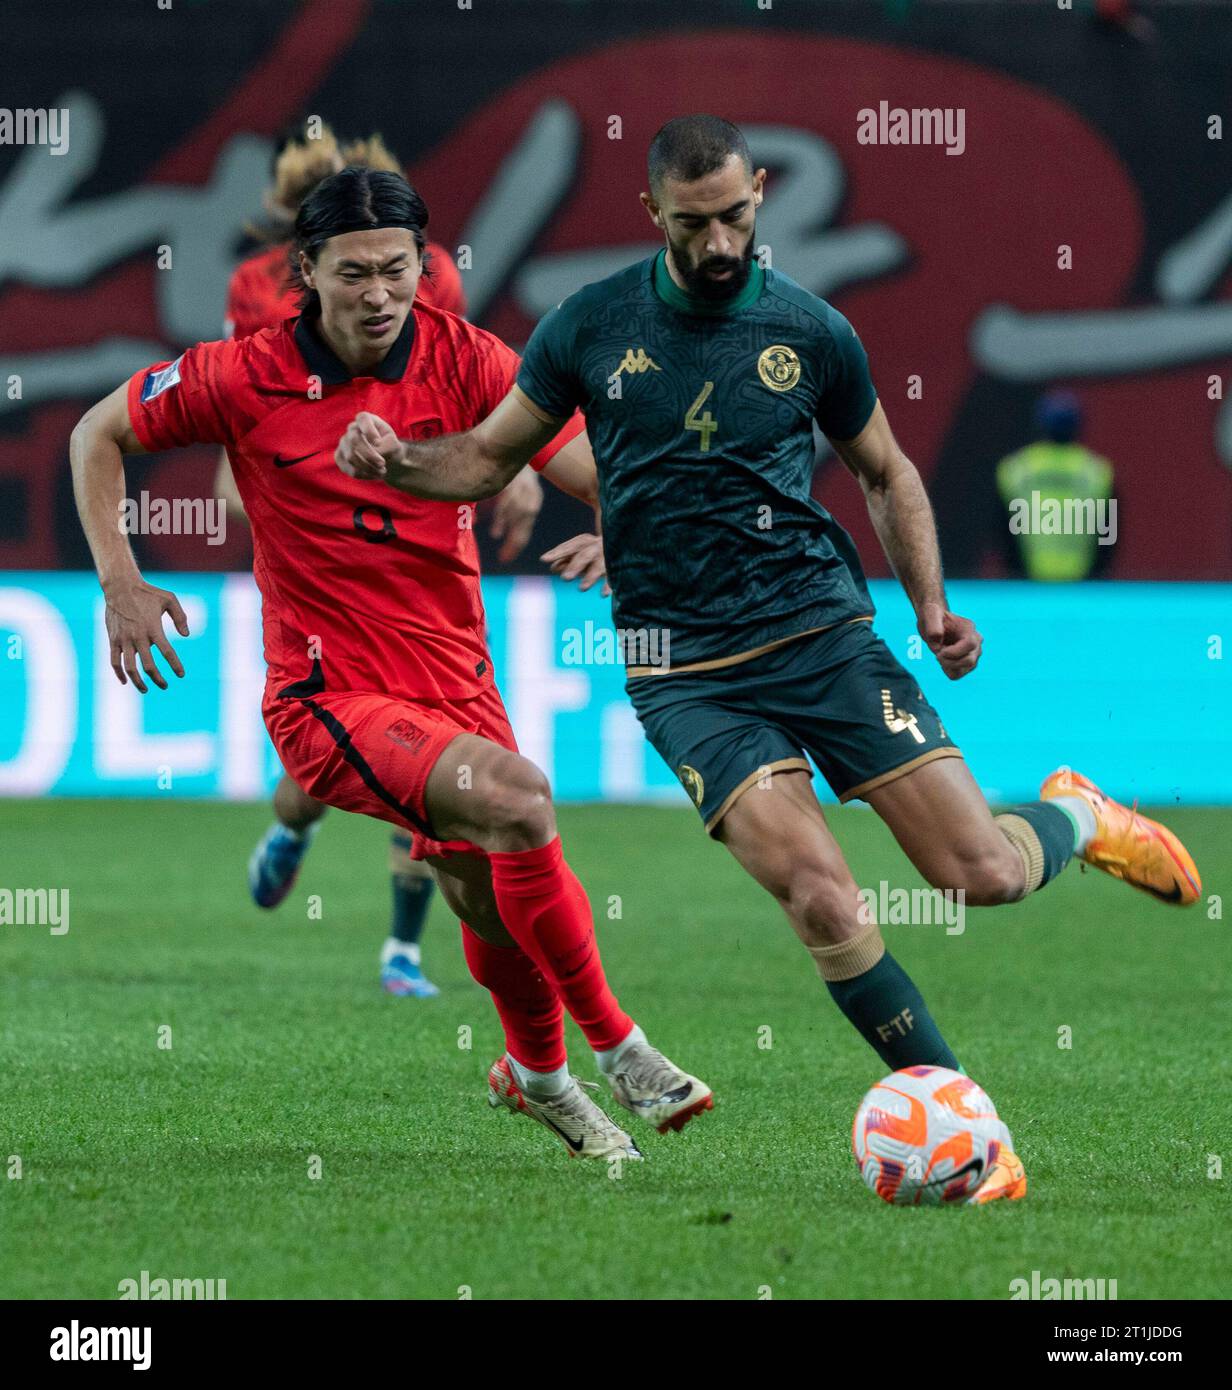 Seoul, South Korea. 13th Oct, 2023. South Korean player Cho Gue-sung (9), dribbles the ball with Yassine Meriah (4), of Tunisia during the friendly soccer match between South Korea and Tunisia at the Seoul World Cup Stadium in Seoul, South Korea on October 13, 2023. (Photo by Lee Young-ho/Sipa USA) Credit: Sipa USA/Alamy Live News Stock Photo